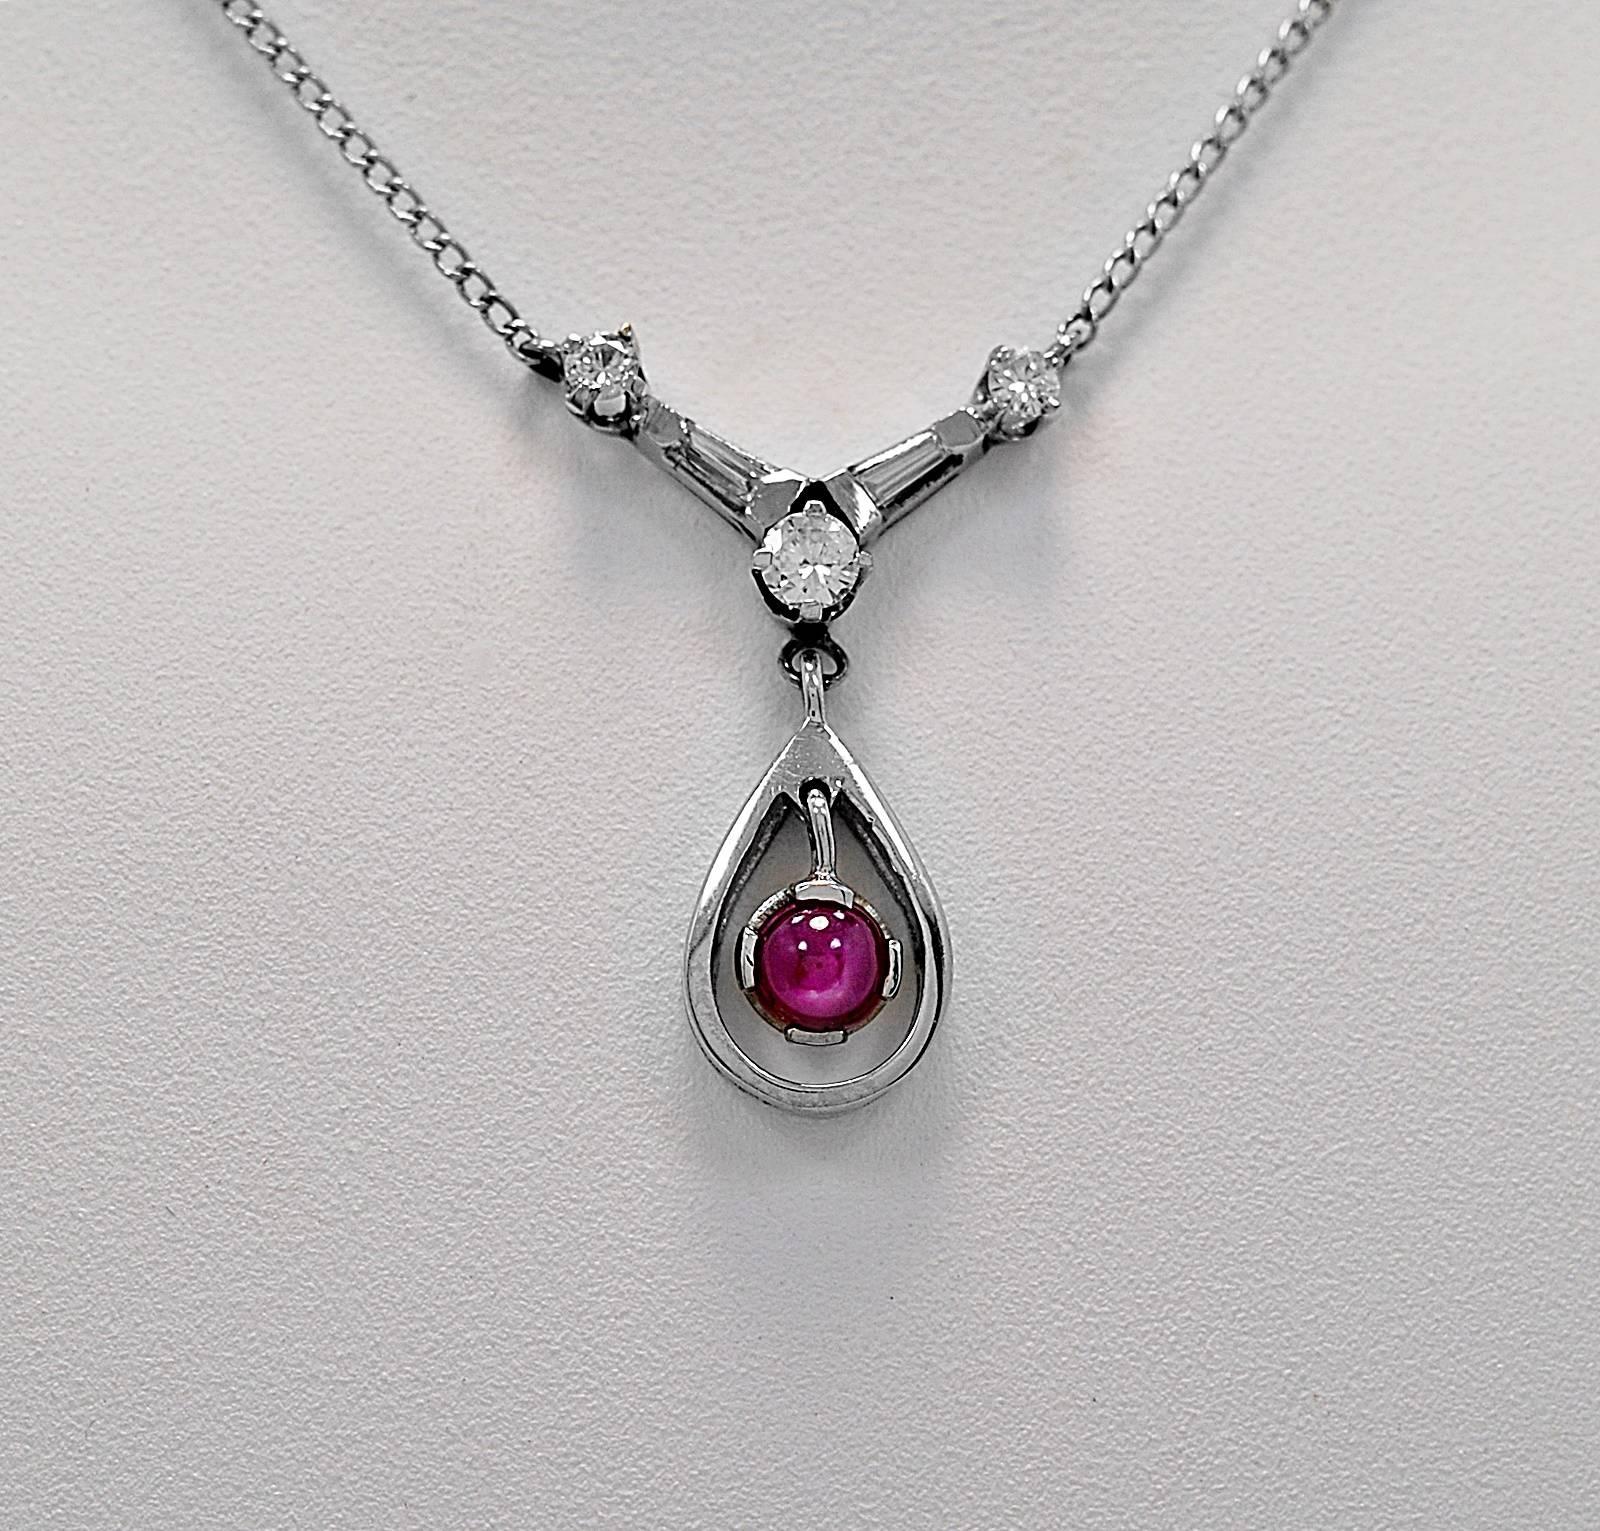 An exceptional estate pendant featuring a .75ct. apx. natural star ruby sapphire and .50ct. apx. T.W. of round brilliant and tapered baguette diamonds. The pendant is set in a 